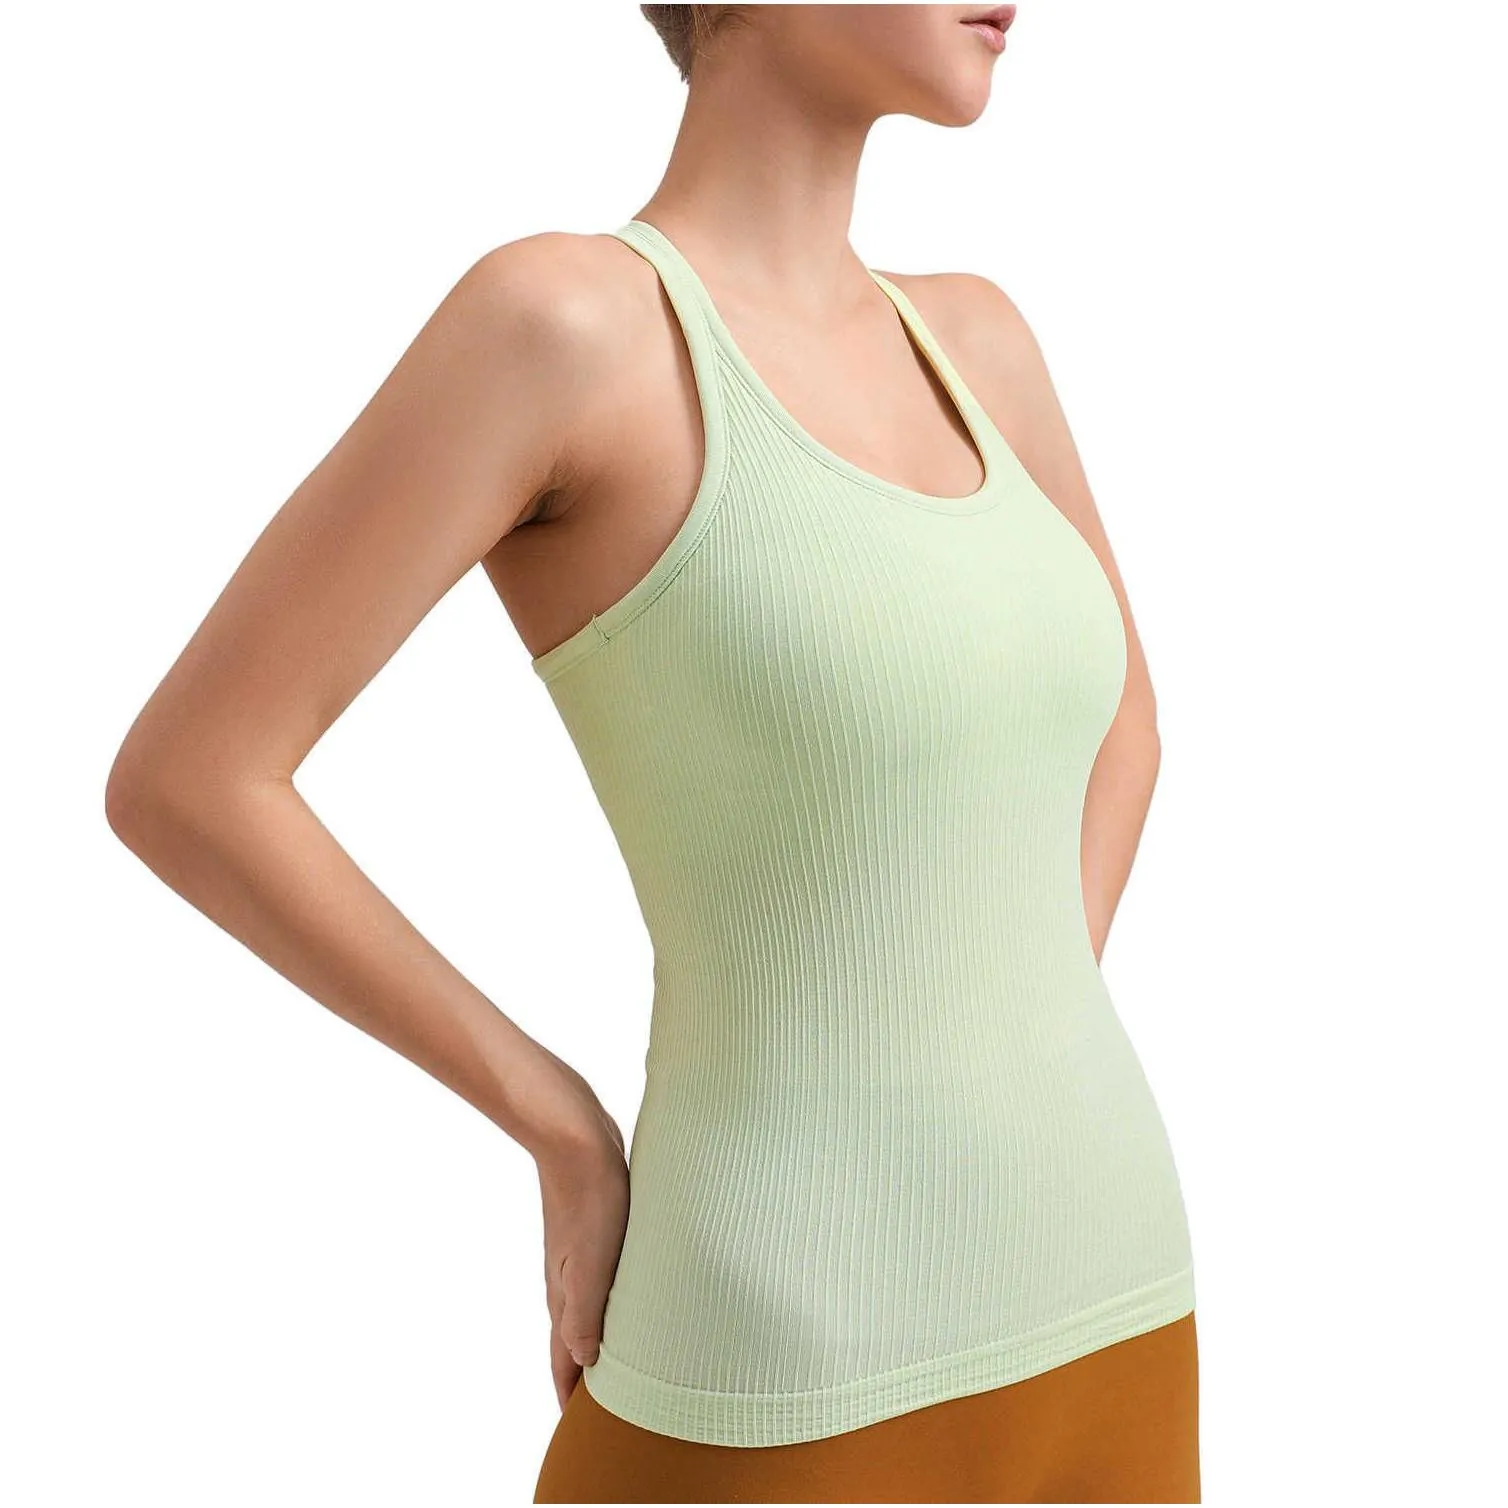 Lu-88289 Yoga Nude Ebb to Street Long Tank Top High Elastic Thread Seamless Back Fitness Rib with Chest Pads for Slimming